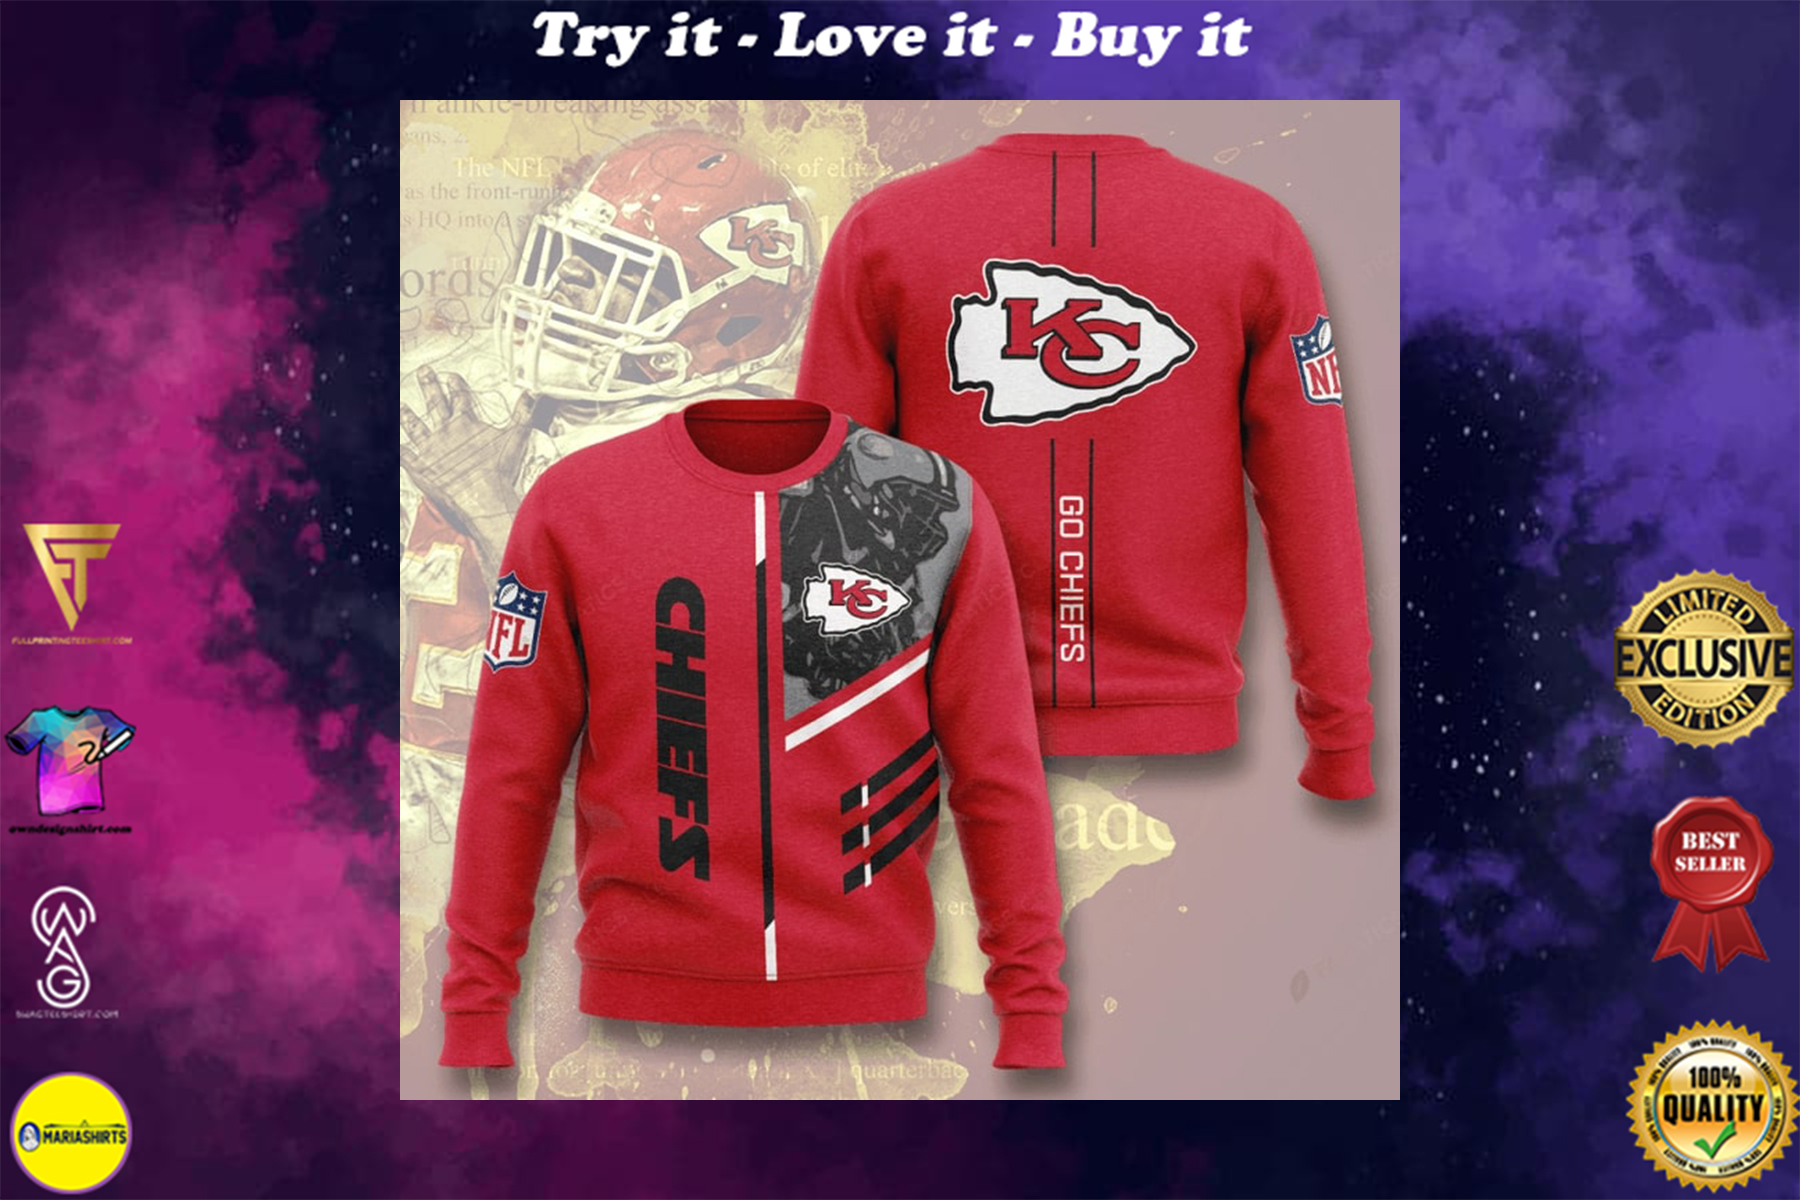 kansas city chiefs go chiefs full printing ugly sweater